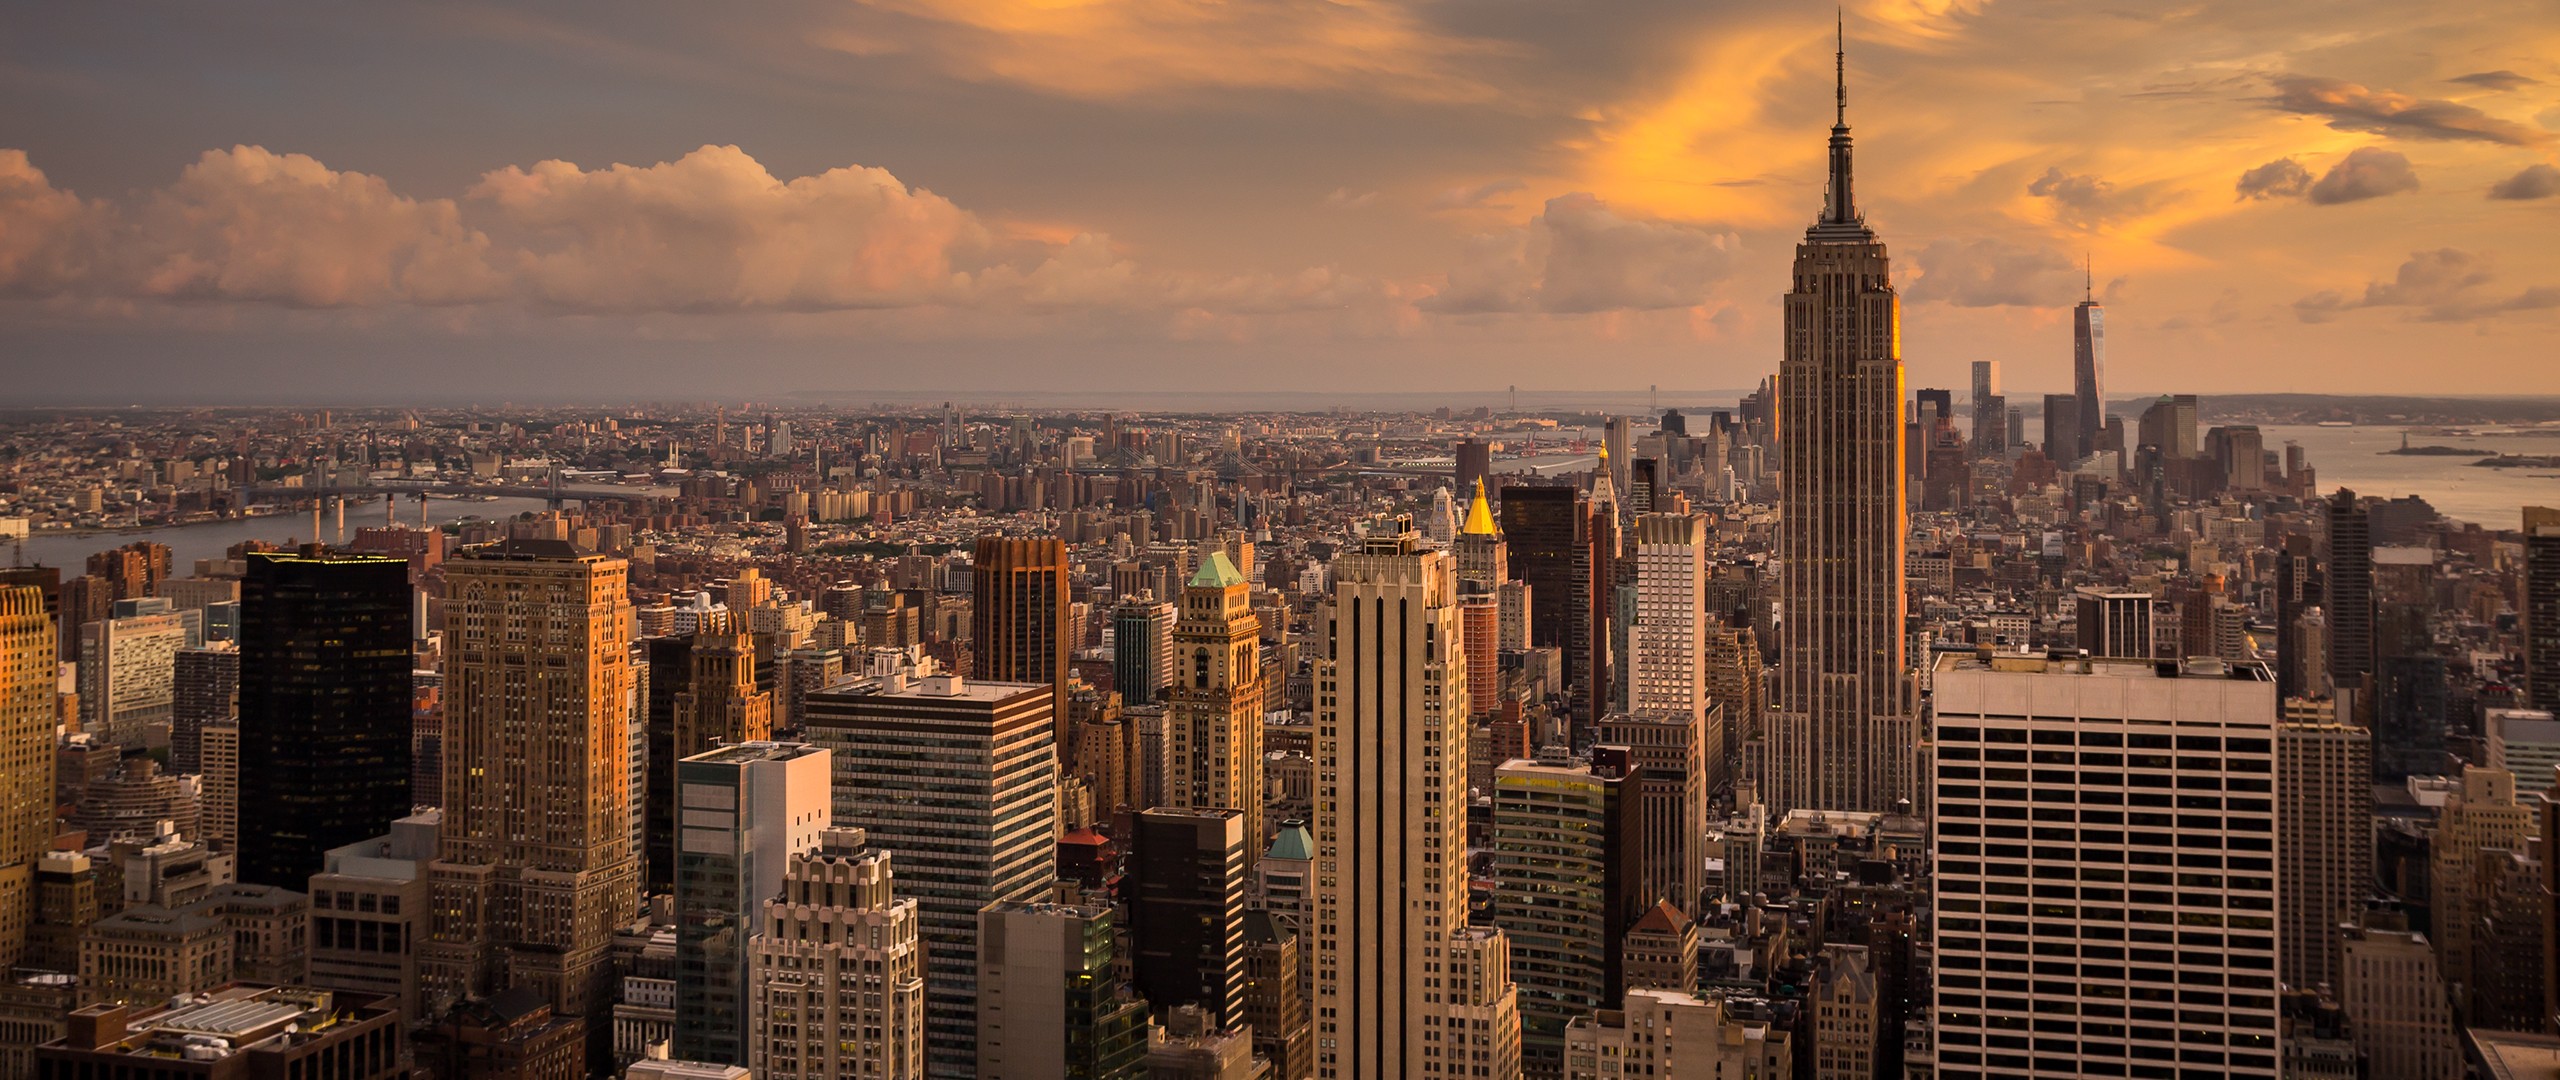 New York City, Manhattan, Morning, Empire State Building, City, Clouds Wallpaper